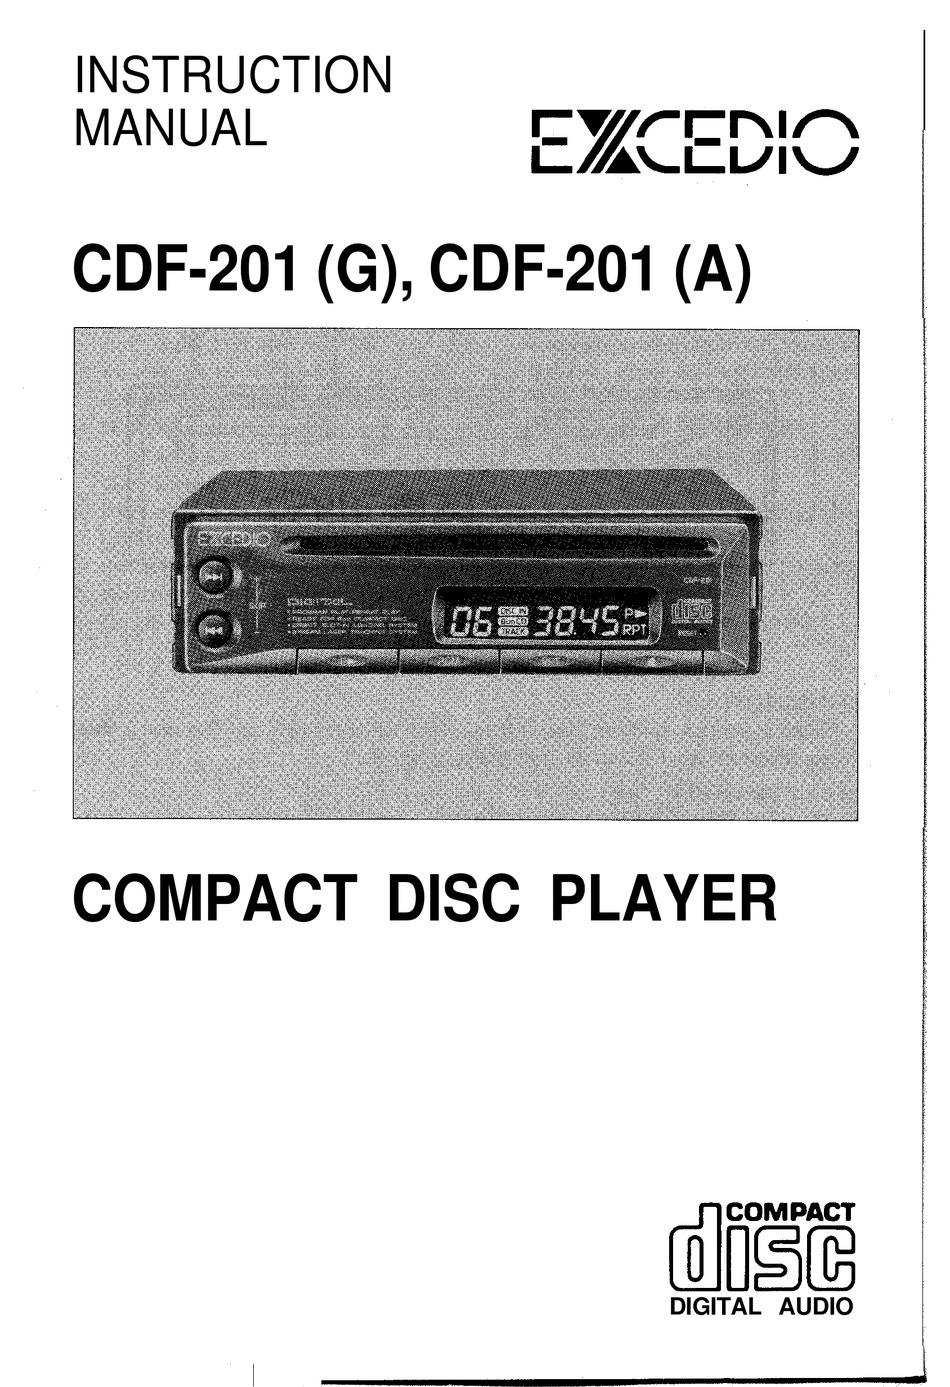 User manual Sanyo ECJ-D100S (English - 21 pages)